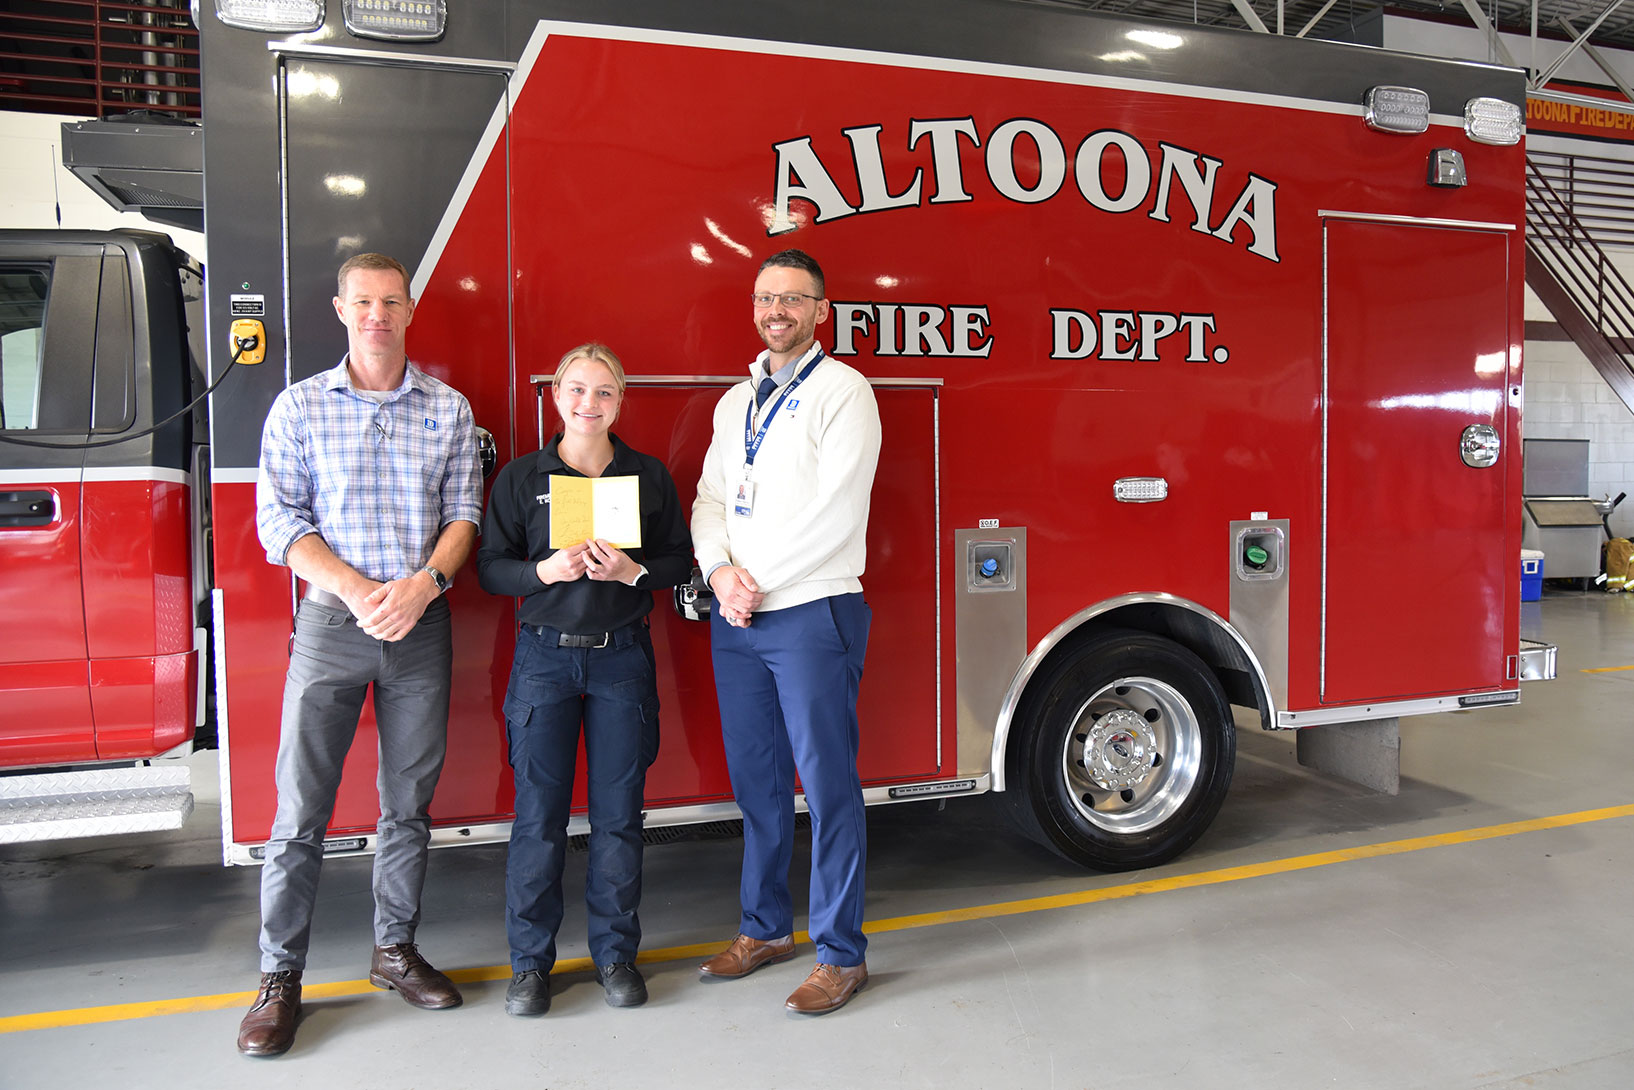 Kolb (above, center) joins Joel Otte (left), DMACC Paramedic Program Chair and Lead Instructor, and Dustyn Dickhaut (right), Coordinator of EMS and Fire Science Education at DMACC, for a celebratory photo on Nov. 1, at the Altoona Fire Department​.